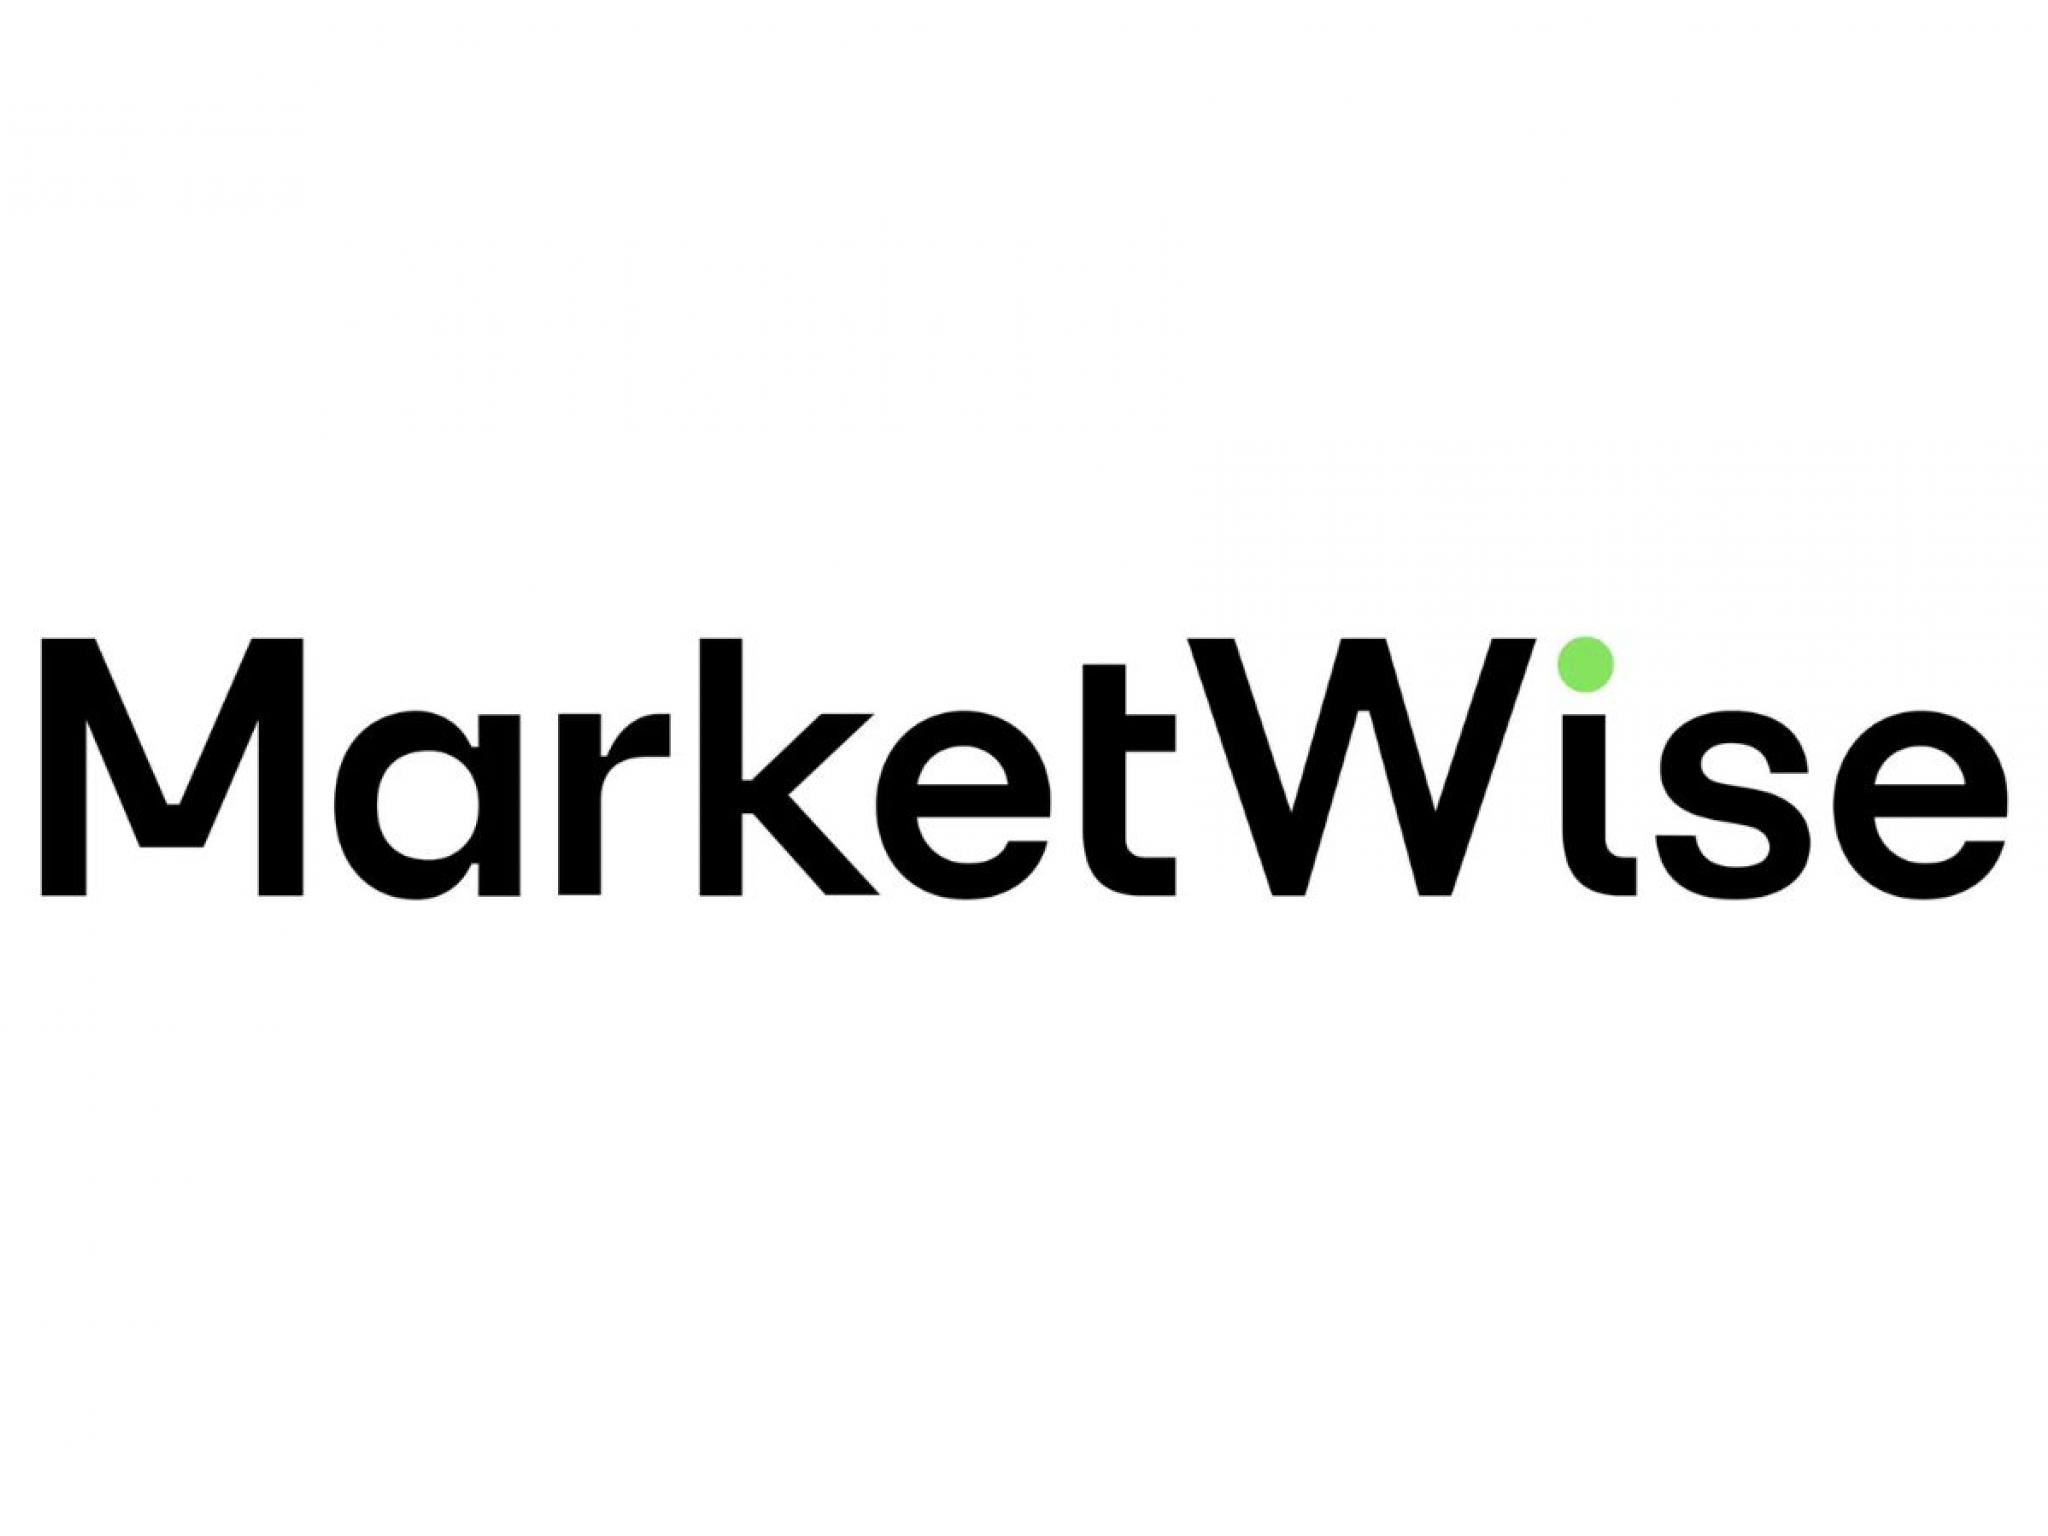  marketwise-and-2-other-stocks-under-2-insiders-are-buying 